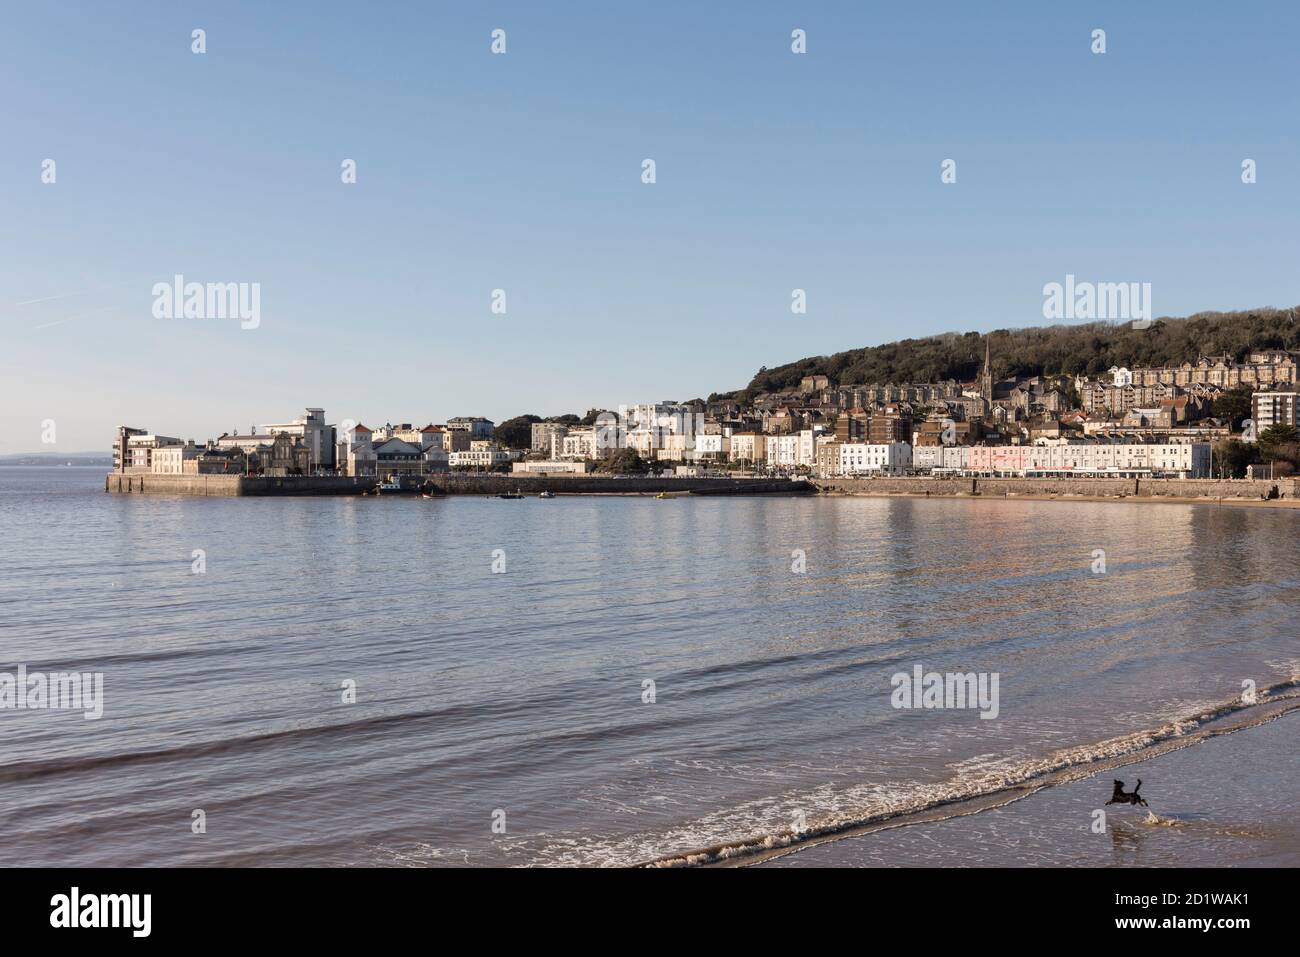 Knightstone Island, Weston-Super-Mare, North Somerset. General view looking north-west across Weston Bay towards Knightstone Island, at high tide, with a dog playing on the beach in the foreground. Stock Photo